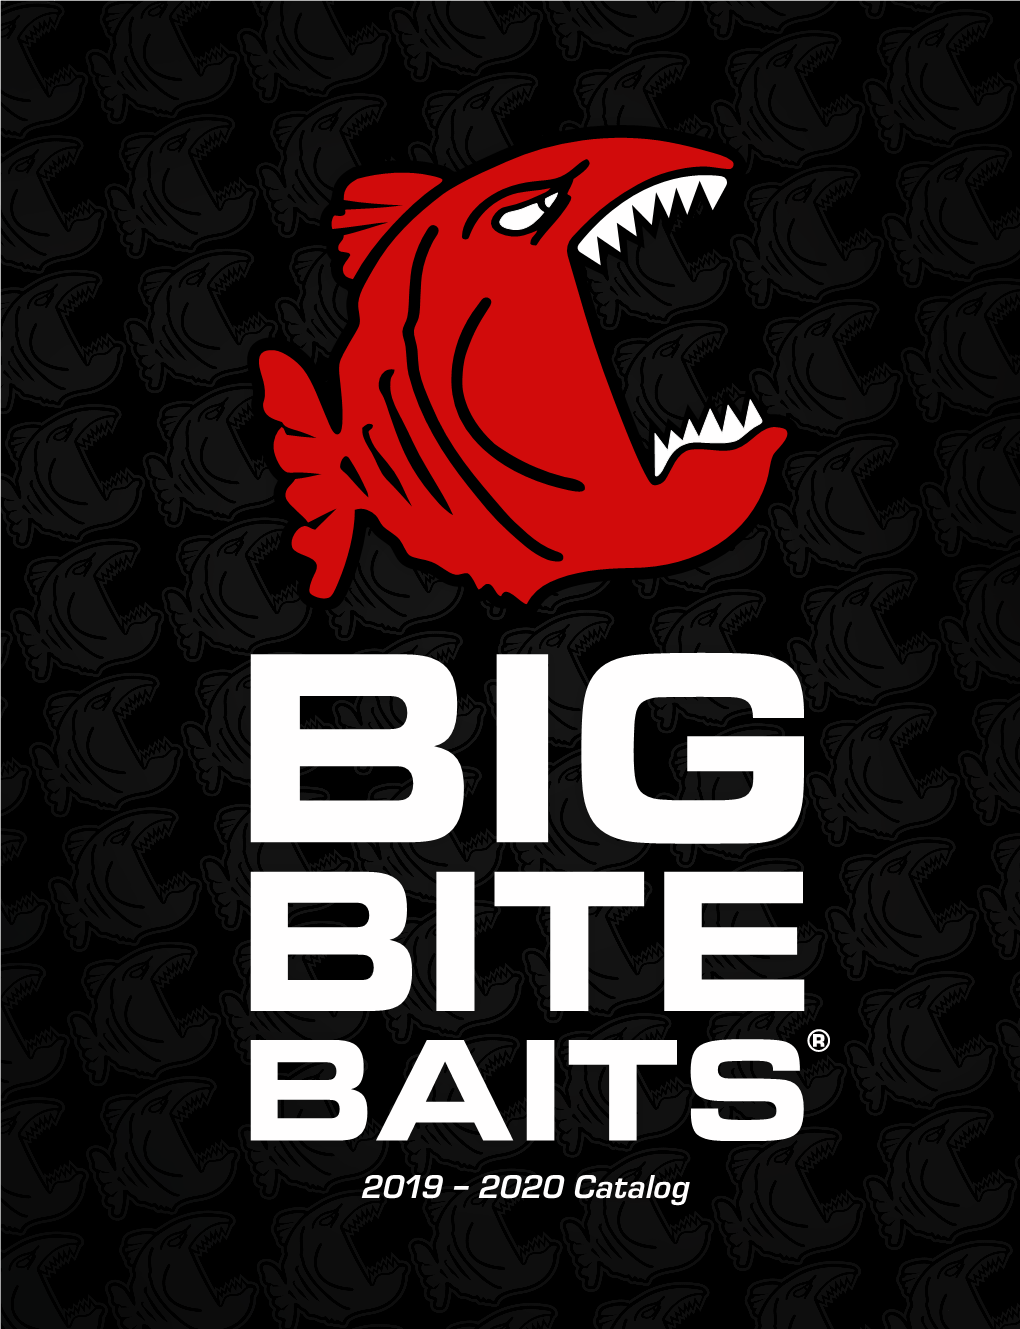 2019 ‒ 2020 Catalog CONTENTS WHAT’S NEW BAITS TOUR SWIM WORM FINESSE SWIMMER Tour Series This Is the Bait We've All Been Waiting For